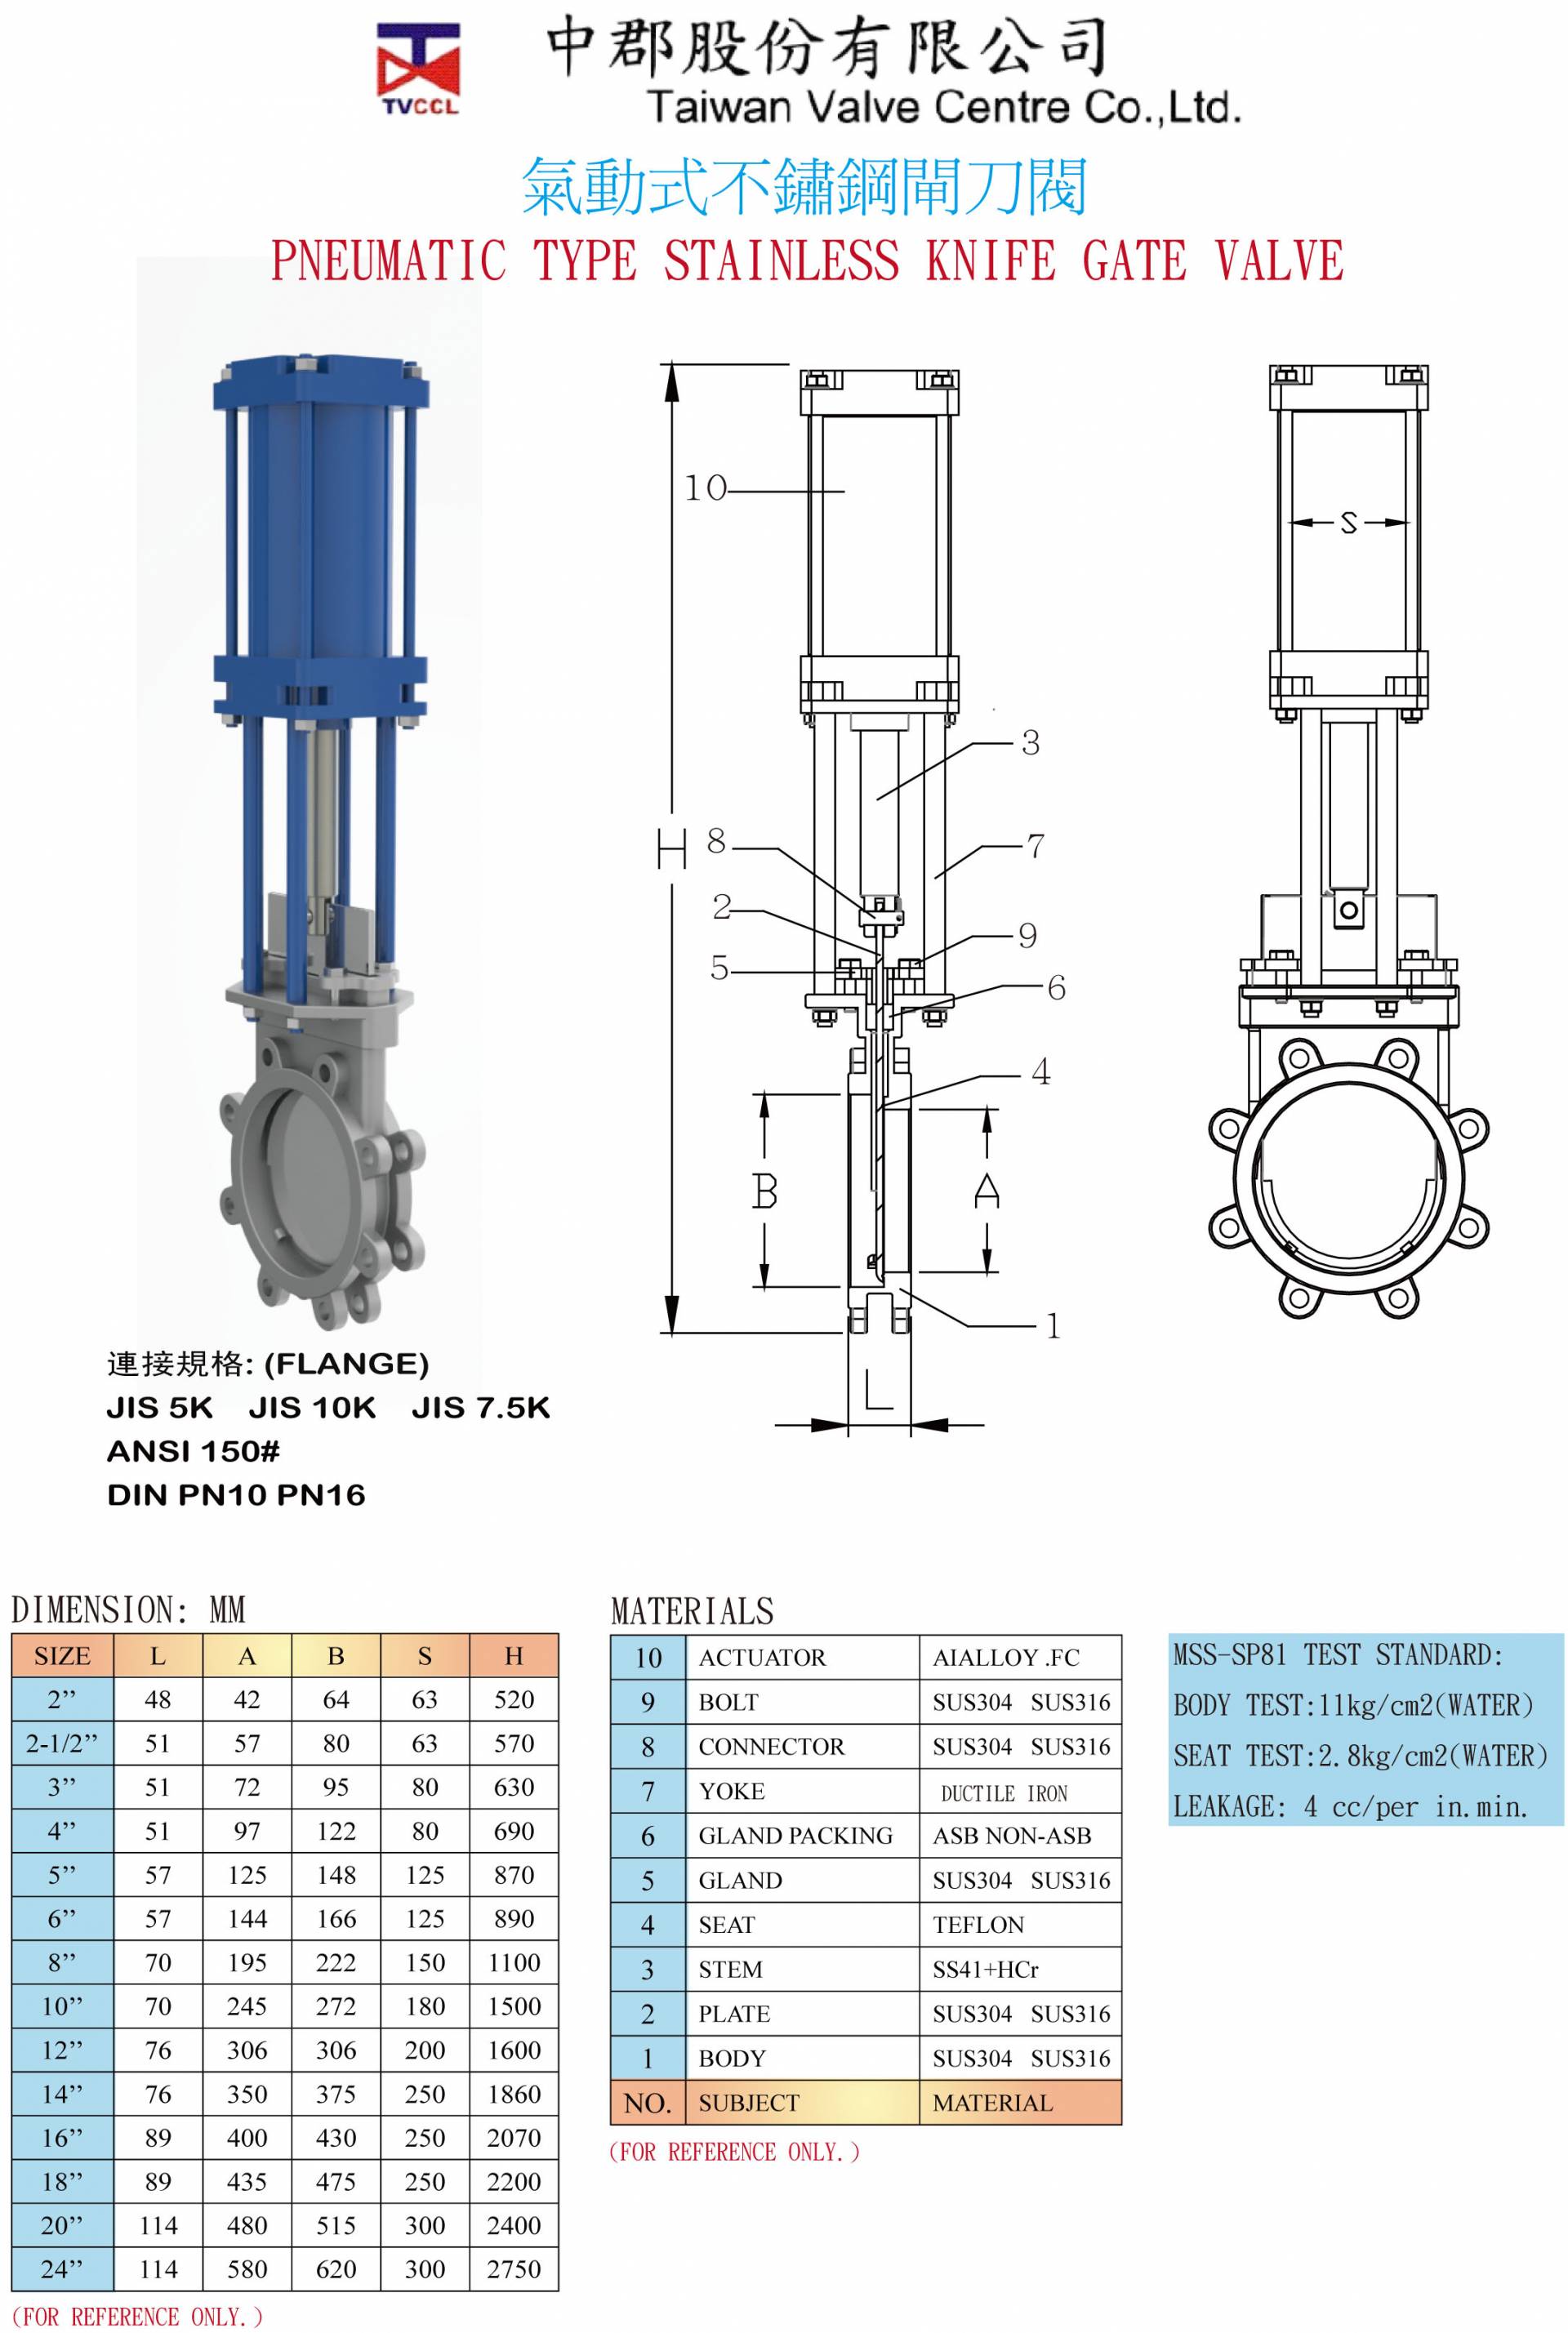 PNEUMATIC TYPE STAINLESS KNIFE GATE VALVE